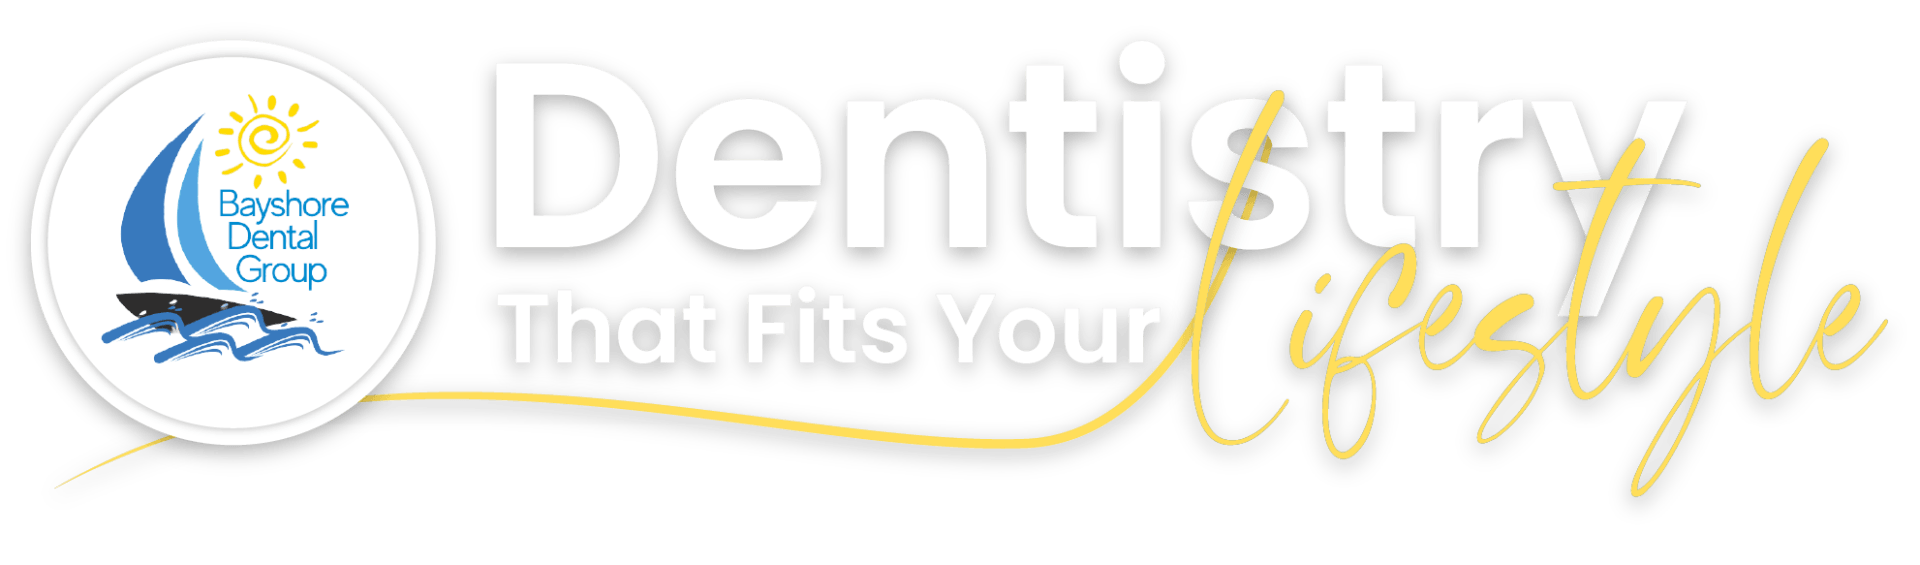 dentistry that fits your lifestyle